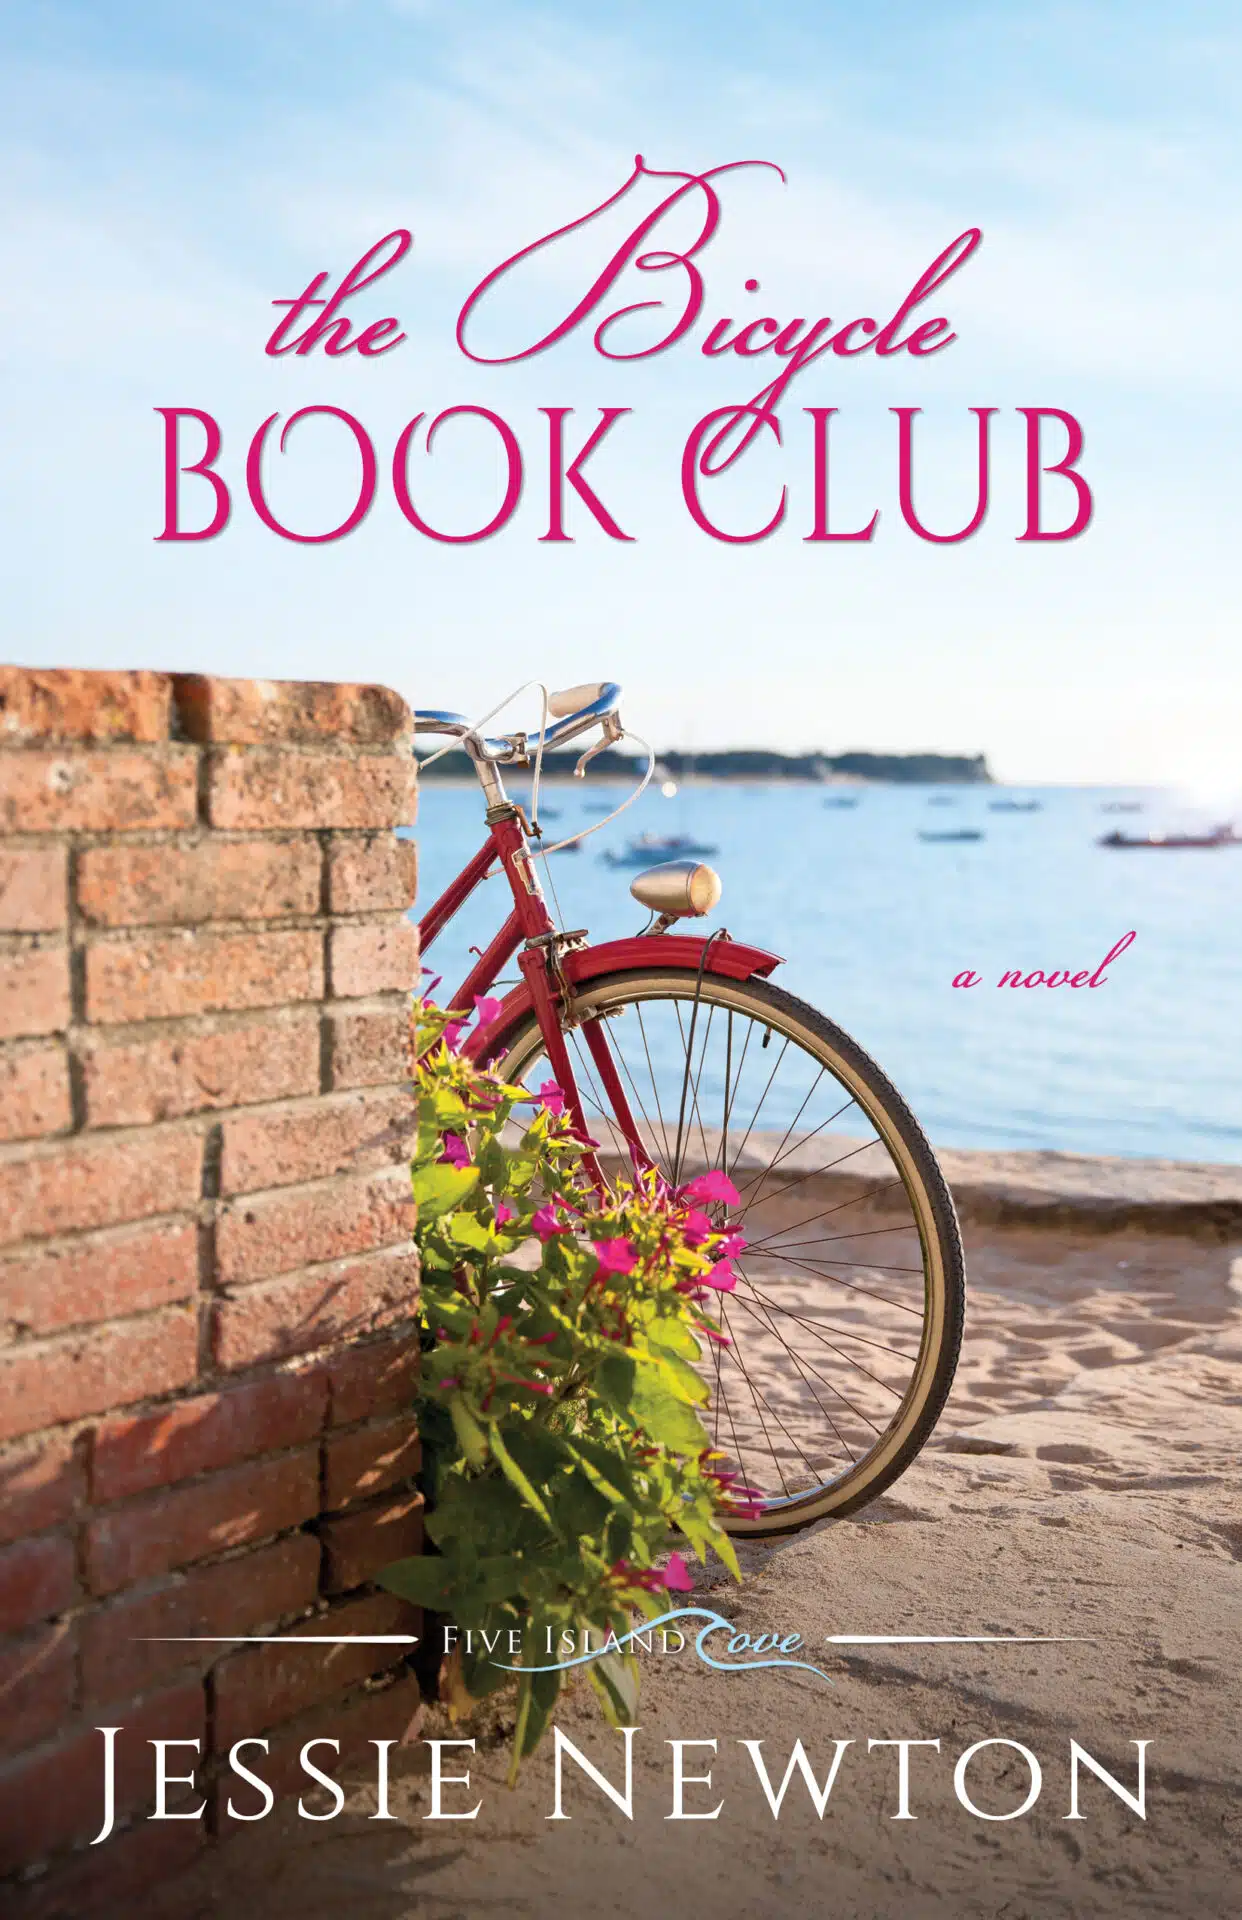 The Bicycle Book Club